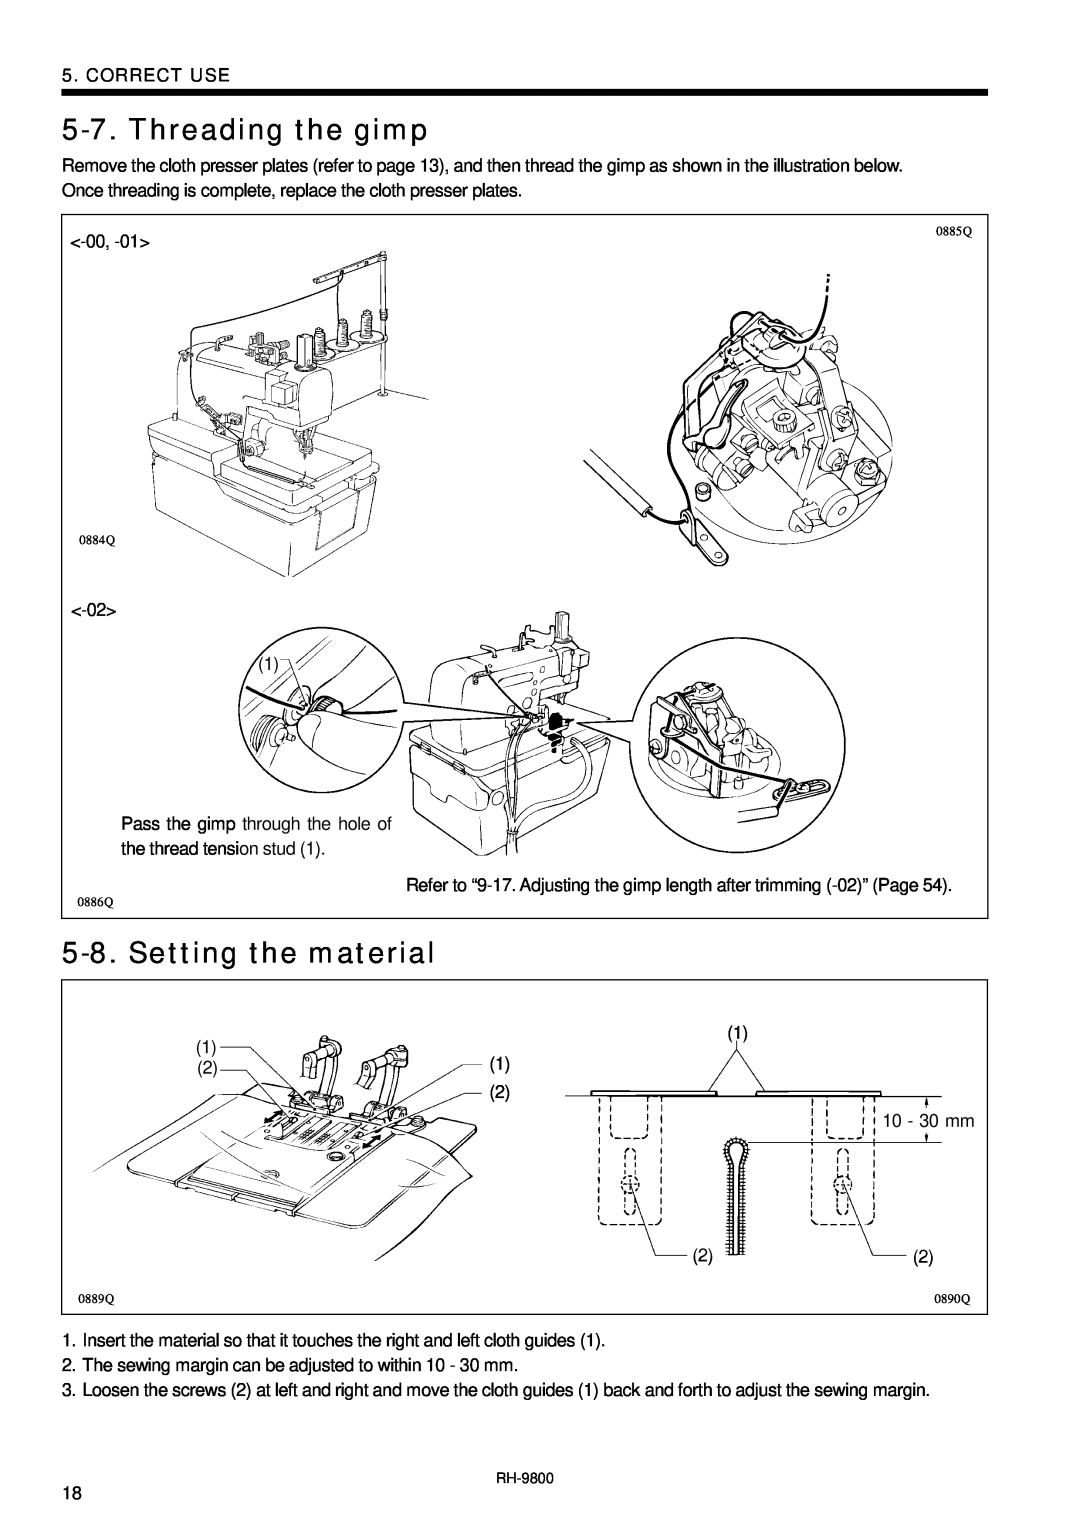 Brother DH4-B980 instruction manual Threading the gimp, Setting the material, Correct Use 